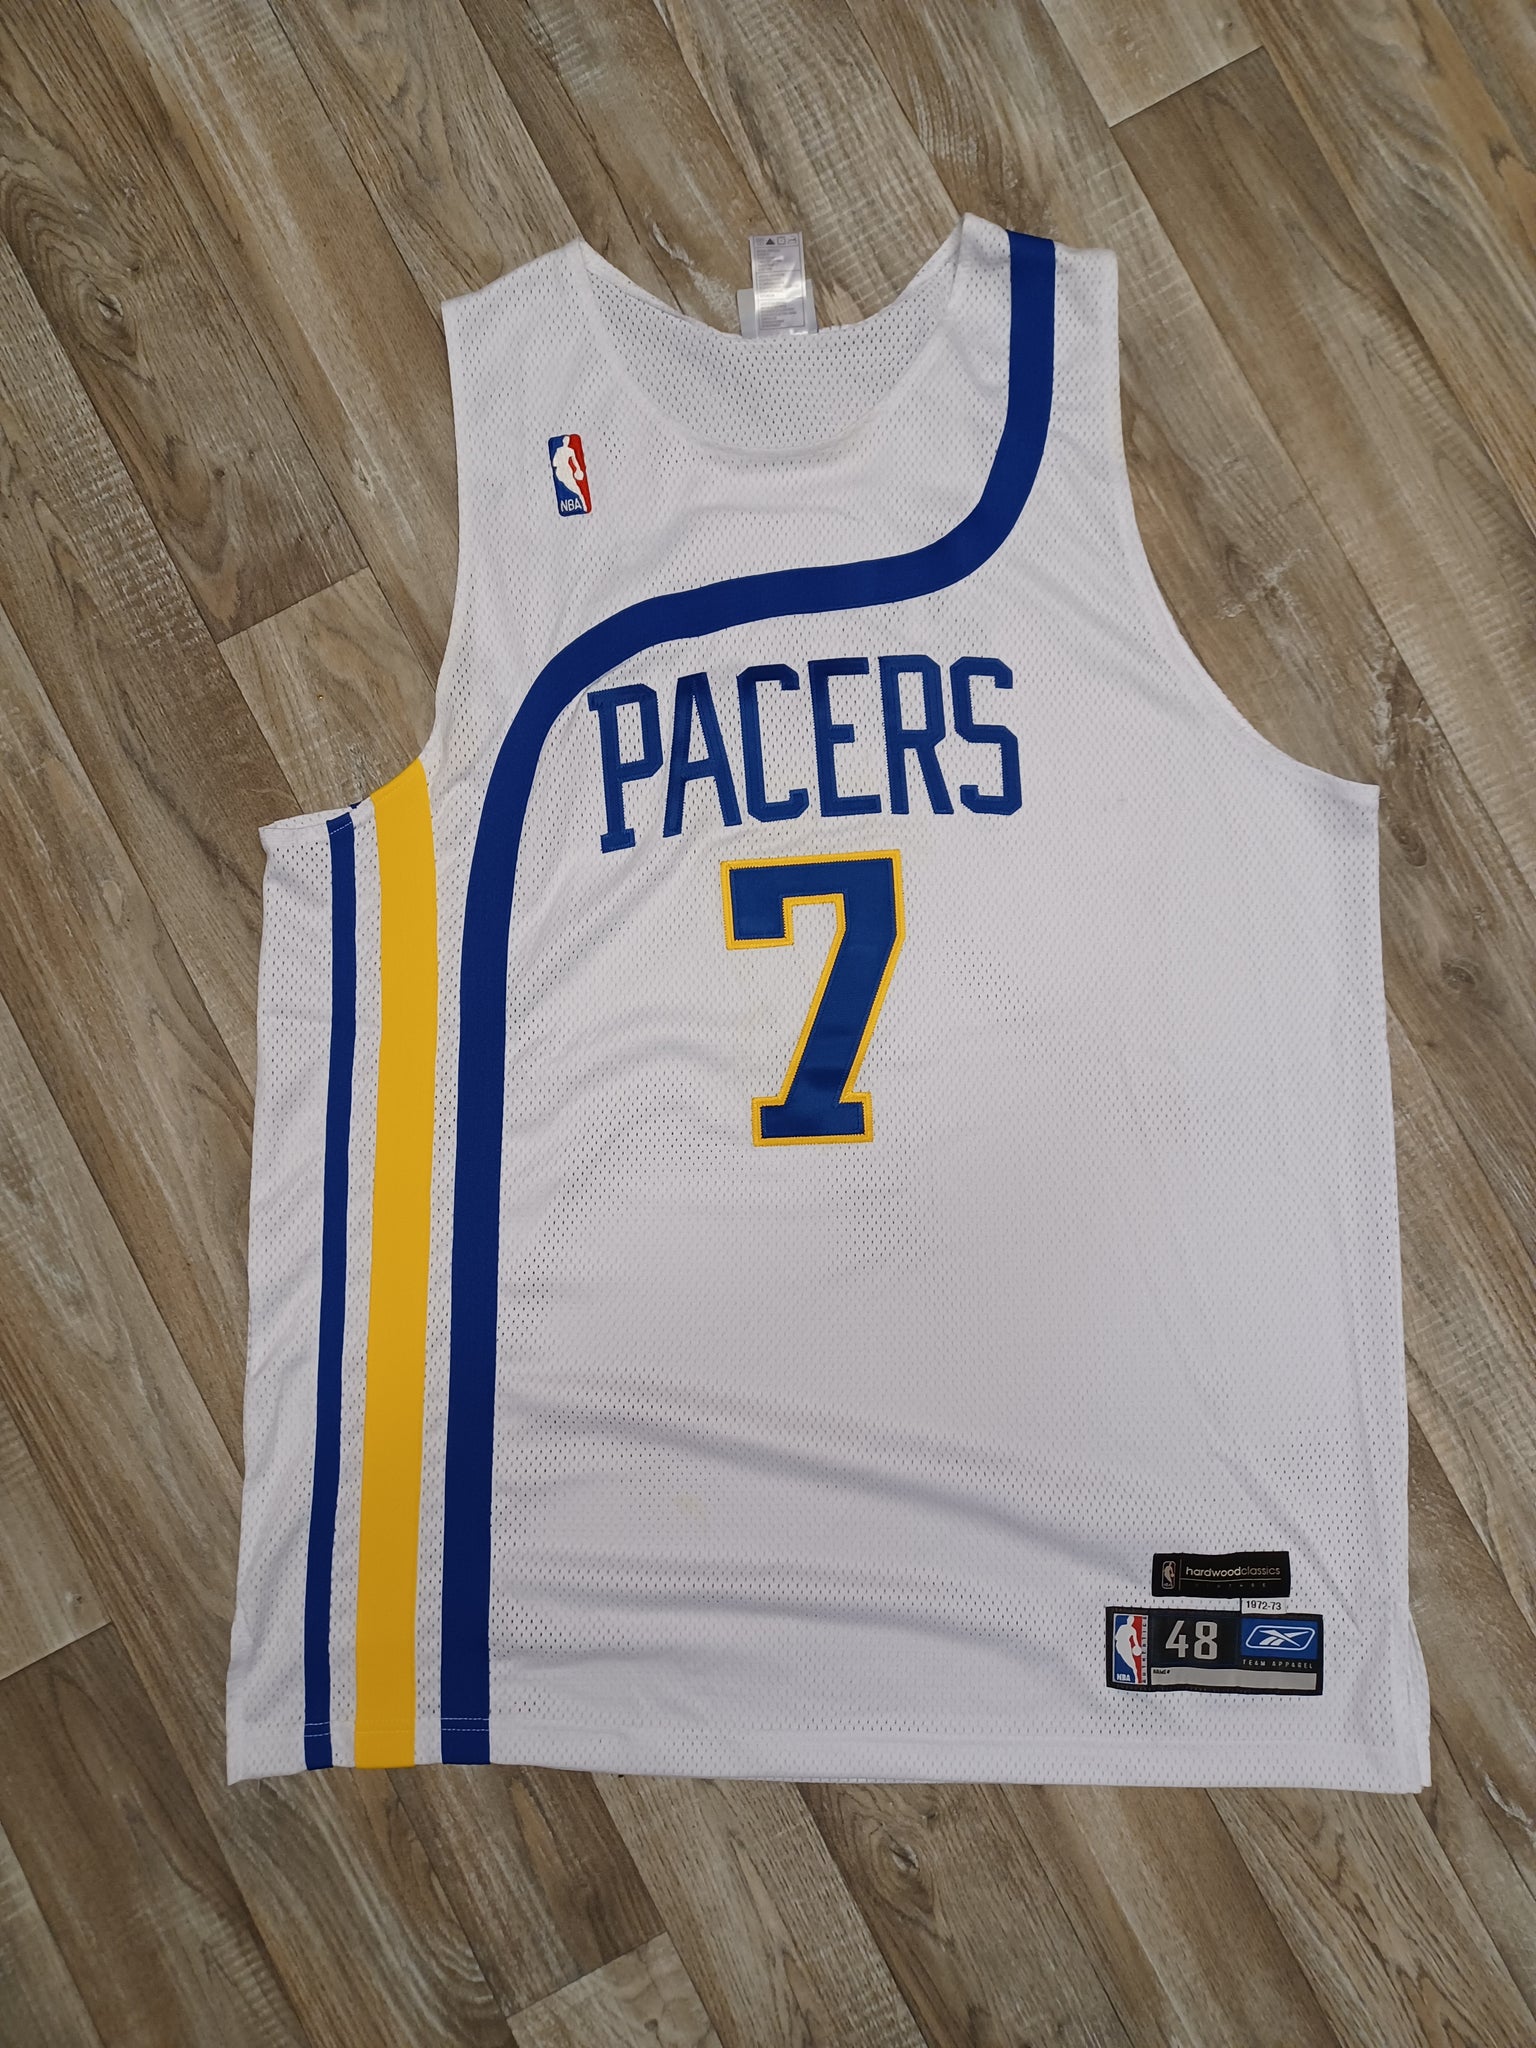 Indiana Pacers Jerseys, Pacers Basketball Jerseys